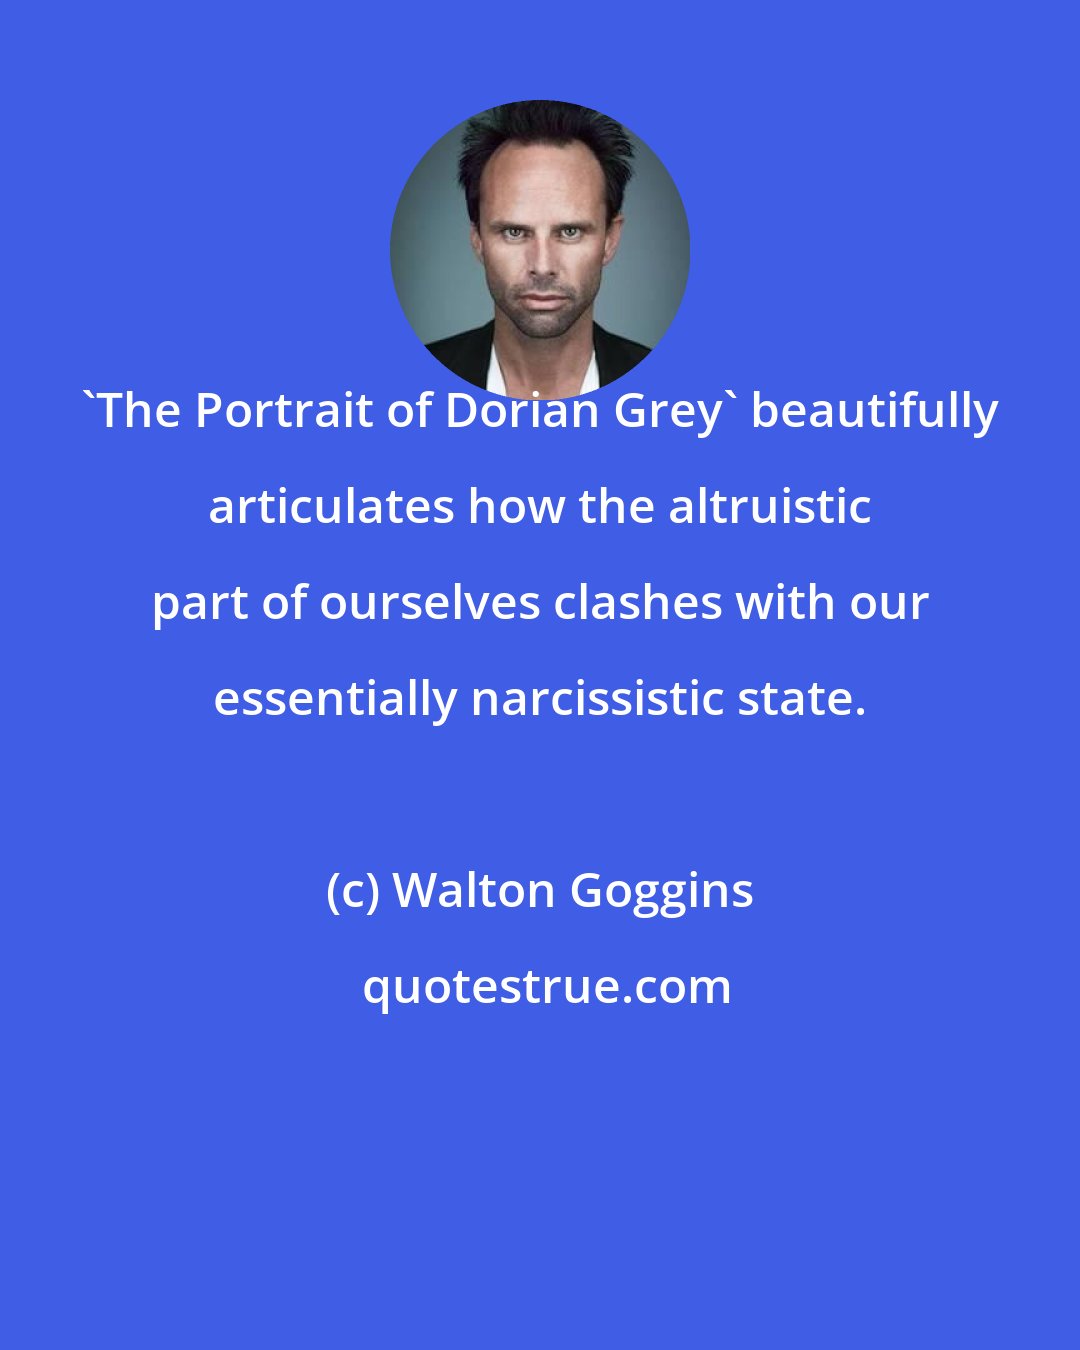 Walton Goggins: 'The Portrait of Dorian Grey' beautifully articulates how the altruistic part of ourselves clashes with our essentially narcissistic state.